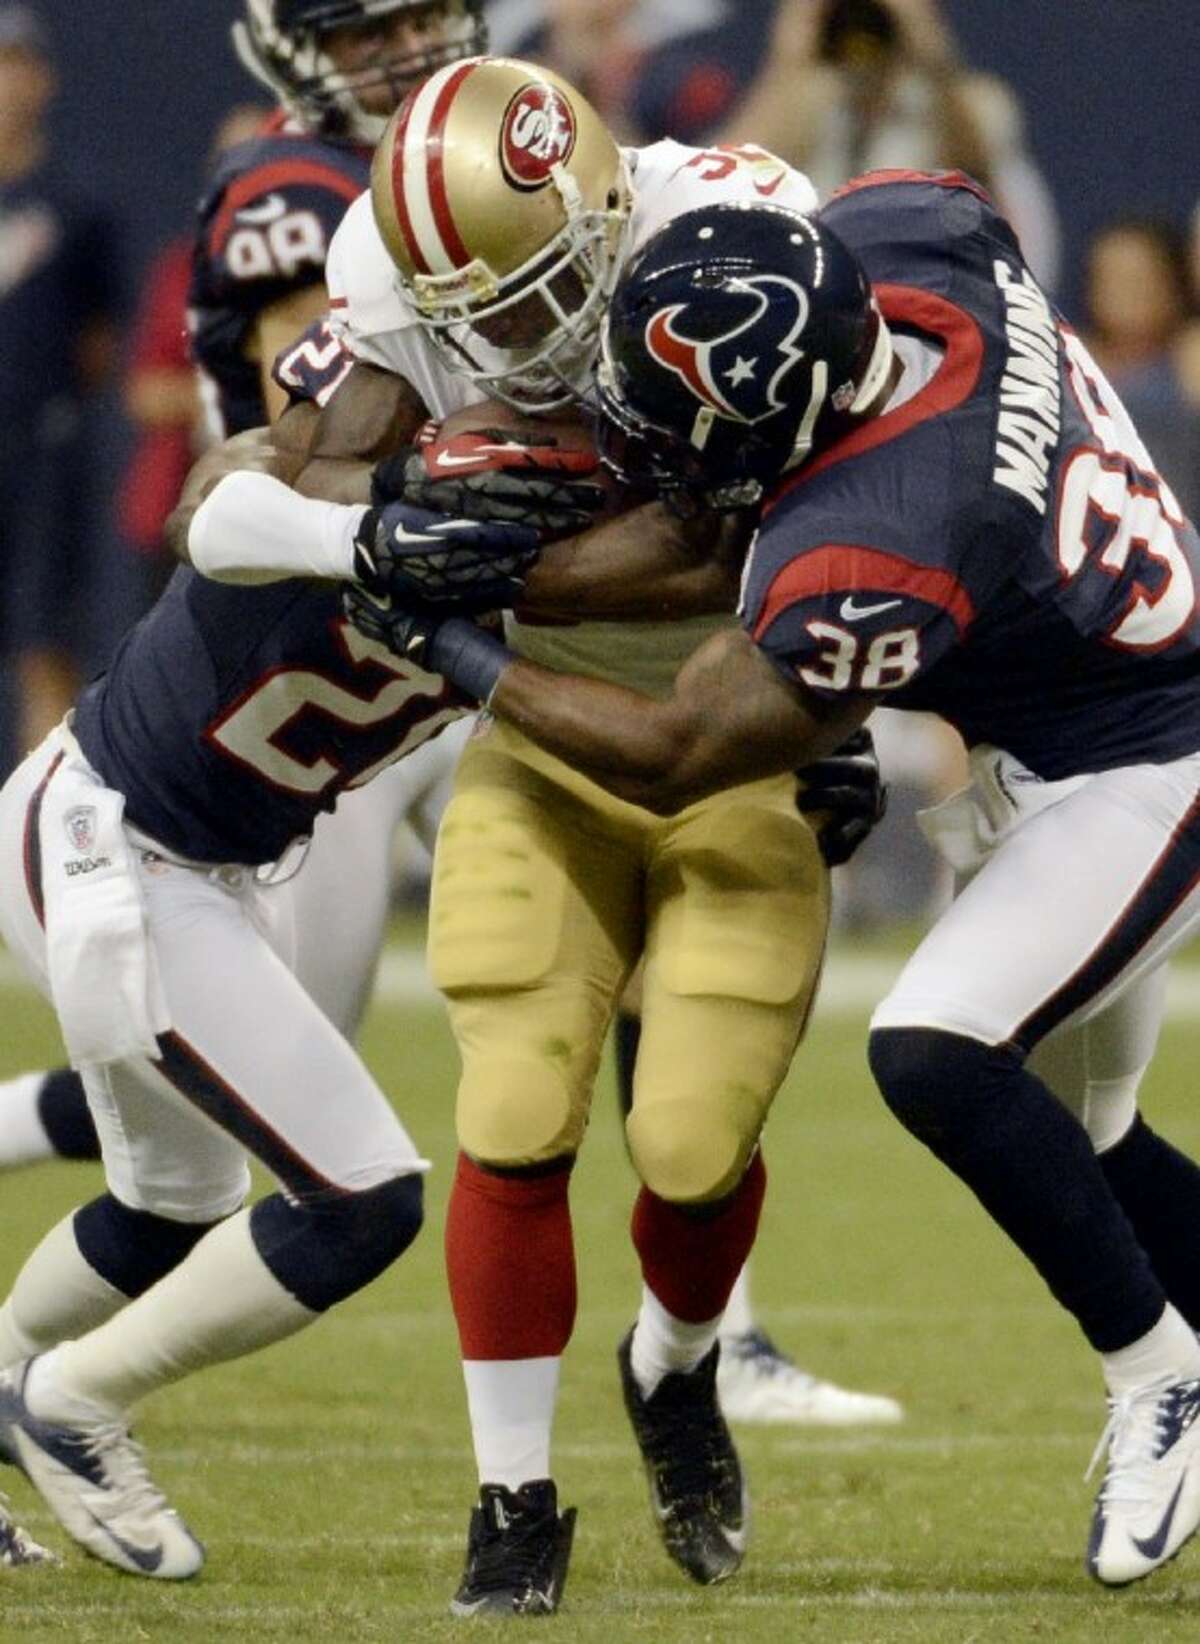 San Francisco’s Kendall Hunter is held up by Houston Texans Danieal Manning and Brice McCain. The Texans won 20-9.